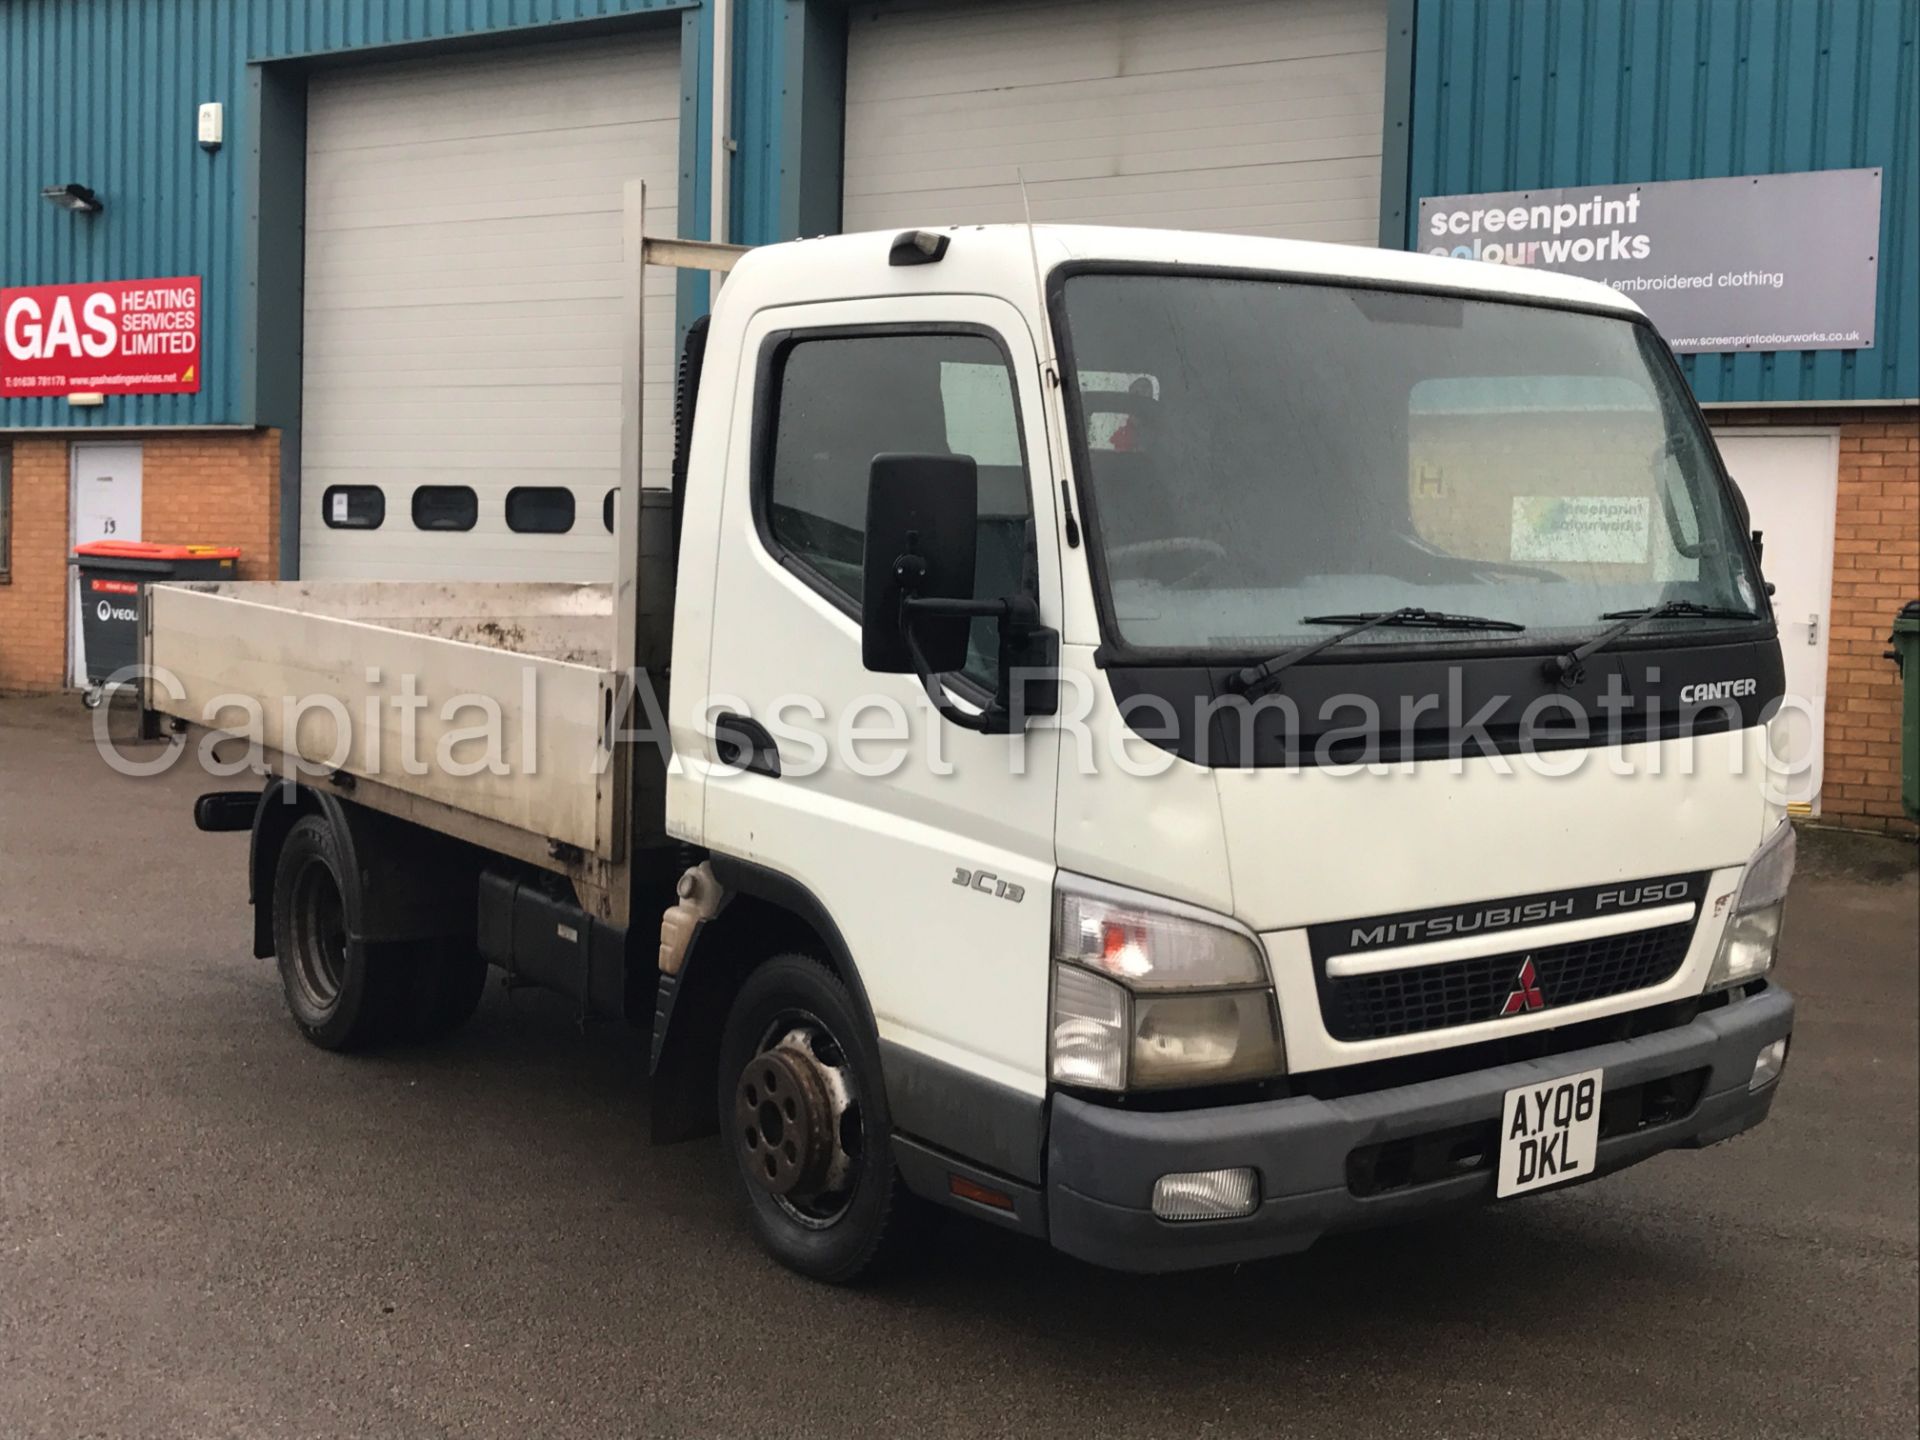 MITSUBISHI FUSO CANTER 3C13-25 'ALLOY' (2008 - 08 REG) '3.0 DIESEL' (1 FORMER KEEPER) - Image 2 of 16